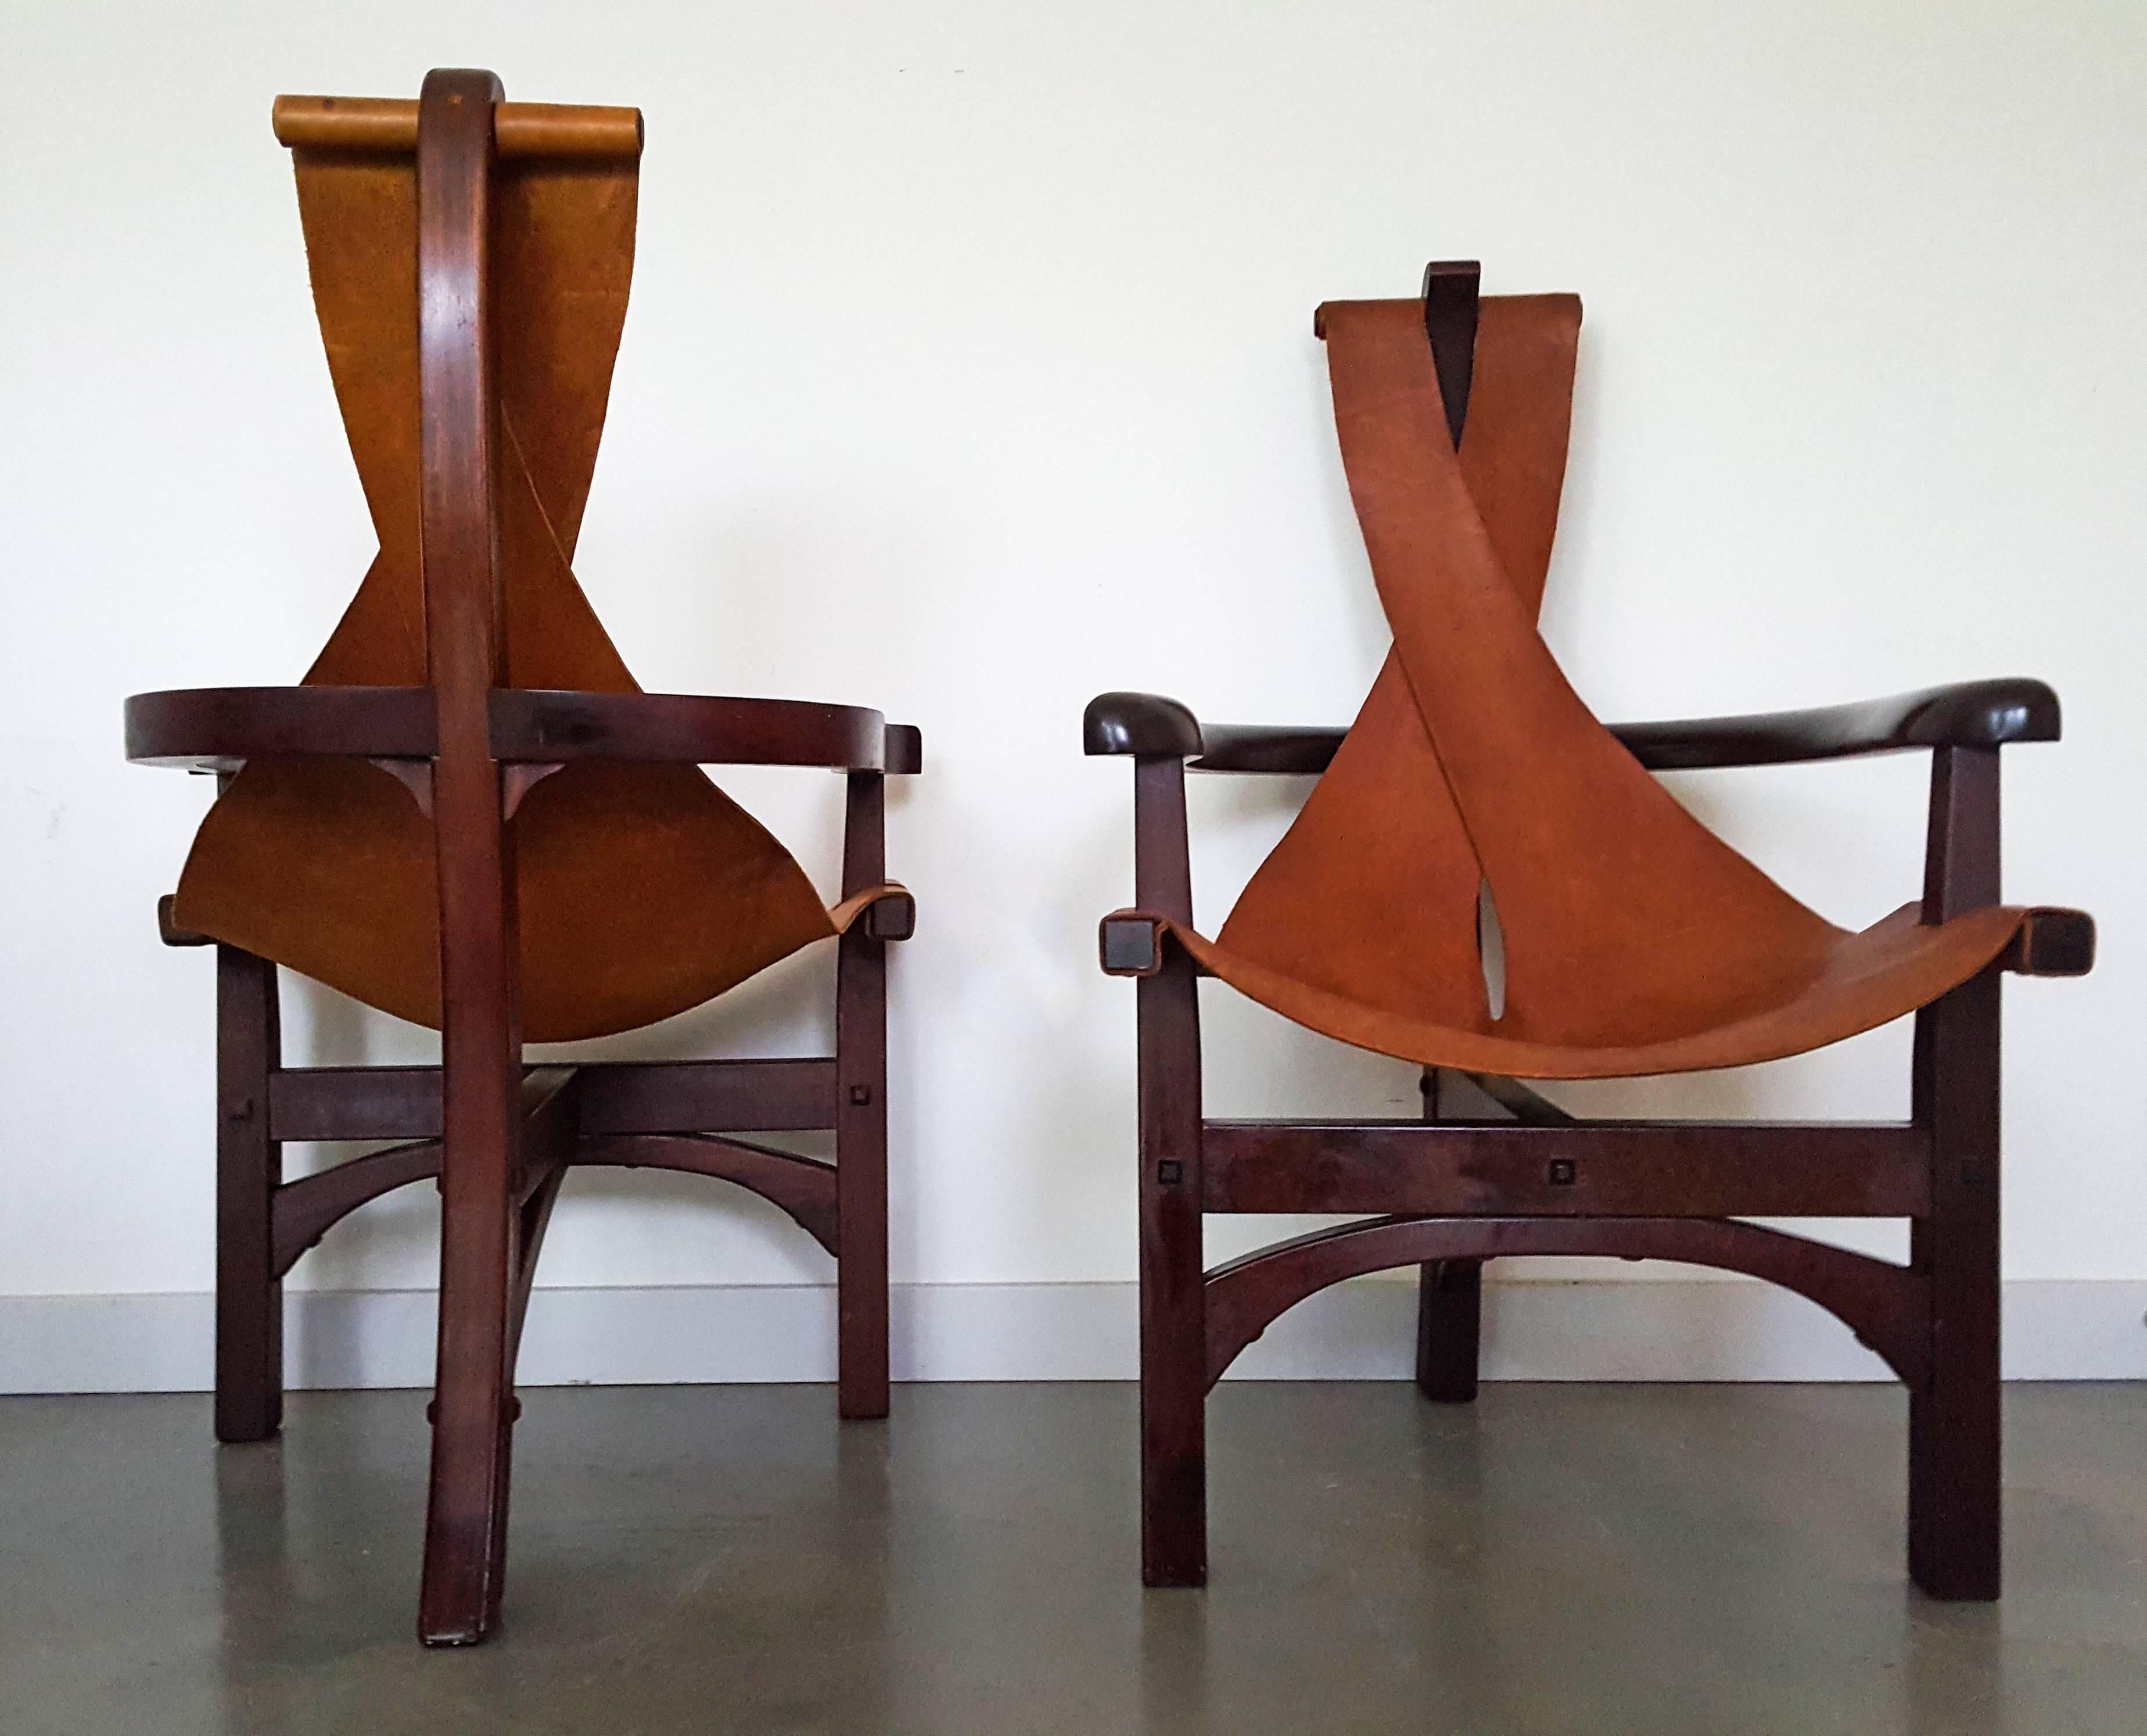 A stunning pair of Arts and Crafts lounge chairs. They are in incredible vintage condition and have a great patina on the slung leather.